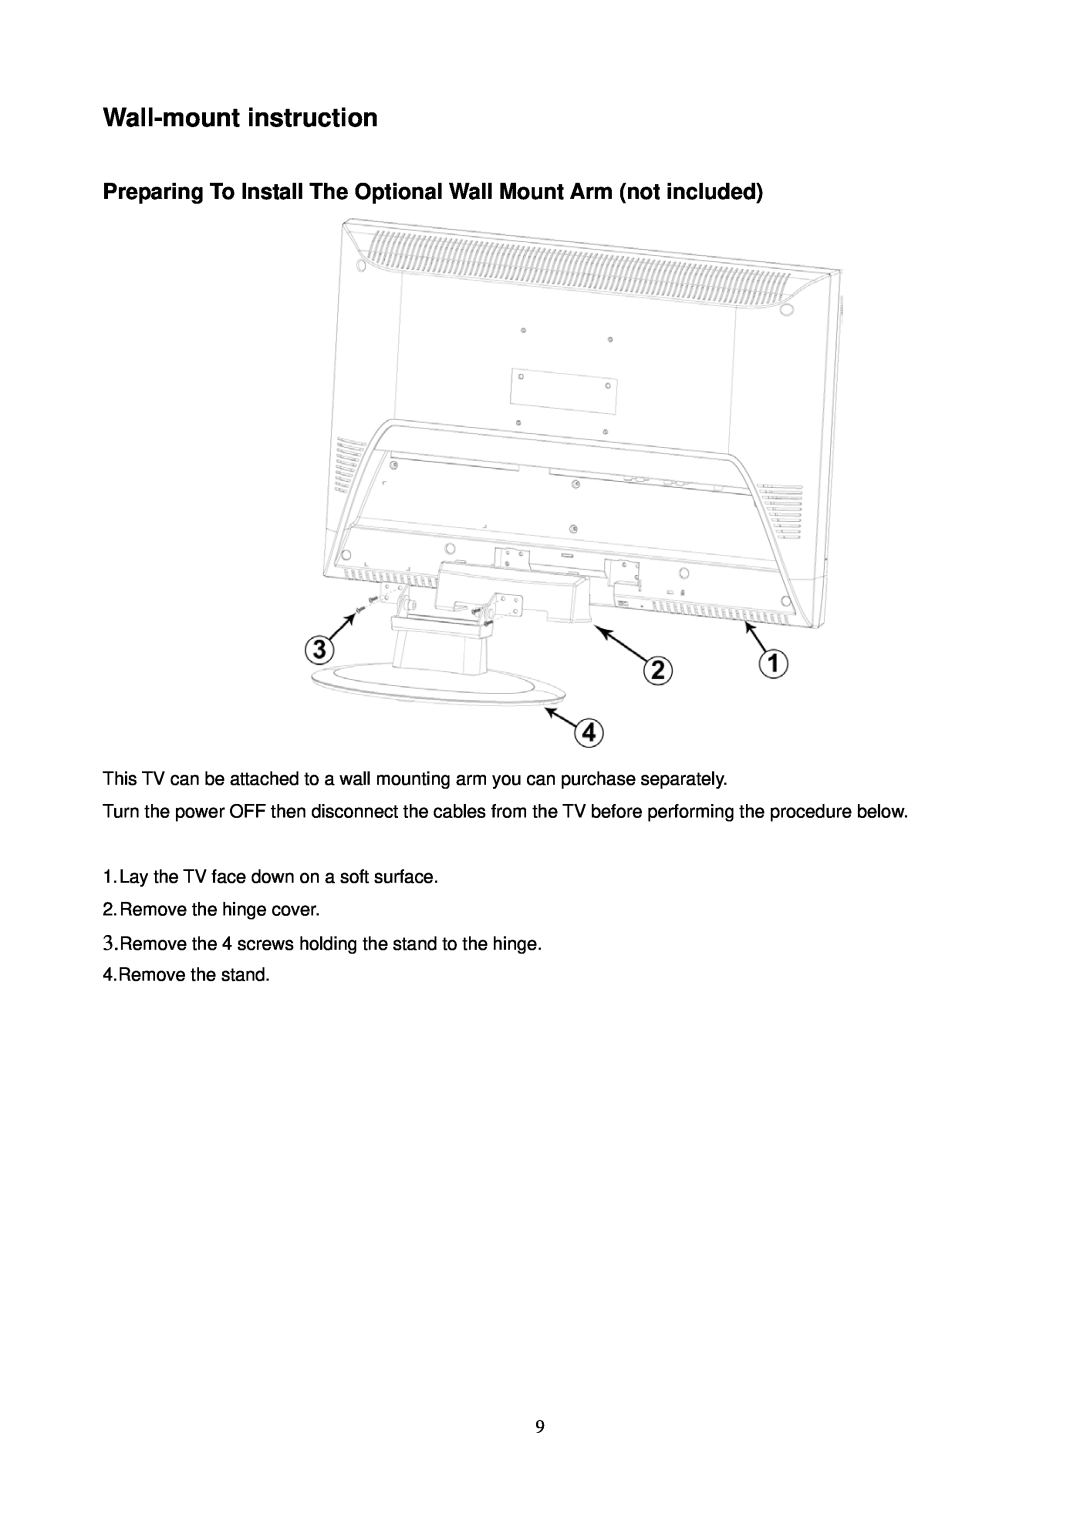 AOC L24H898 manual Wall-mount instruction, Preparing To Install The Optional Wall Mount Arm not included 